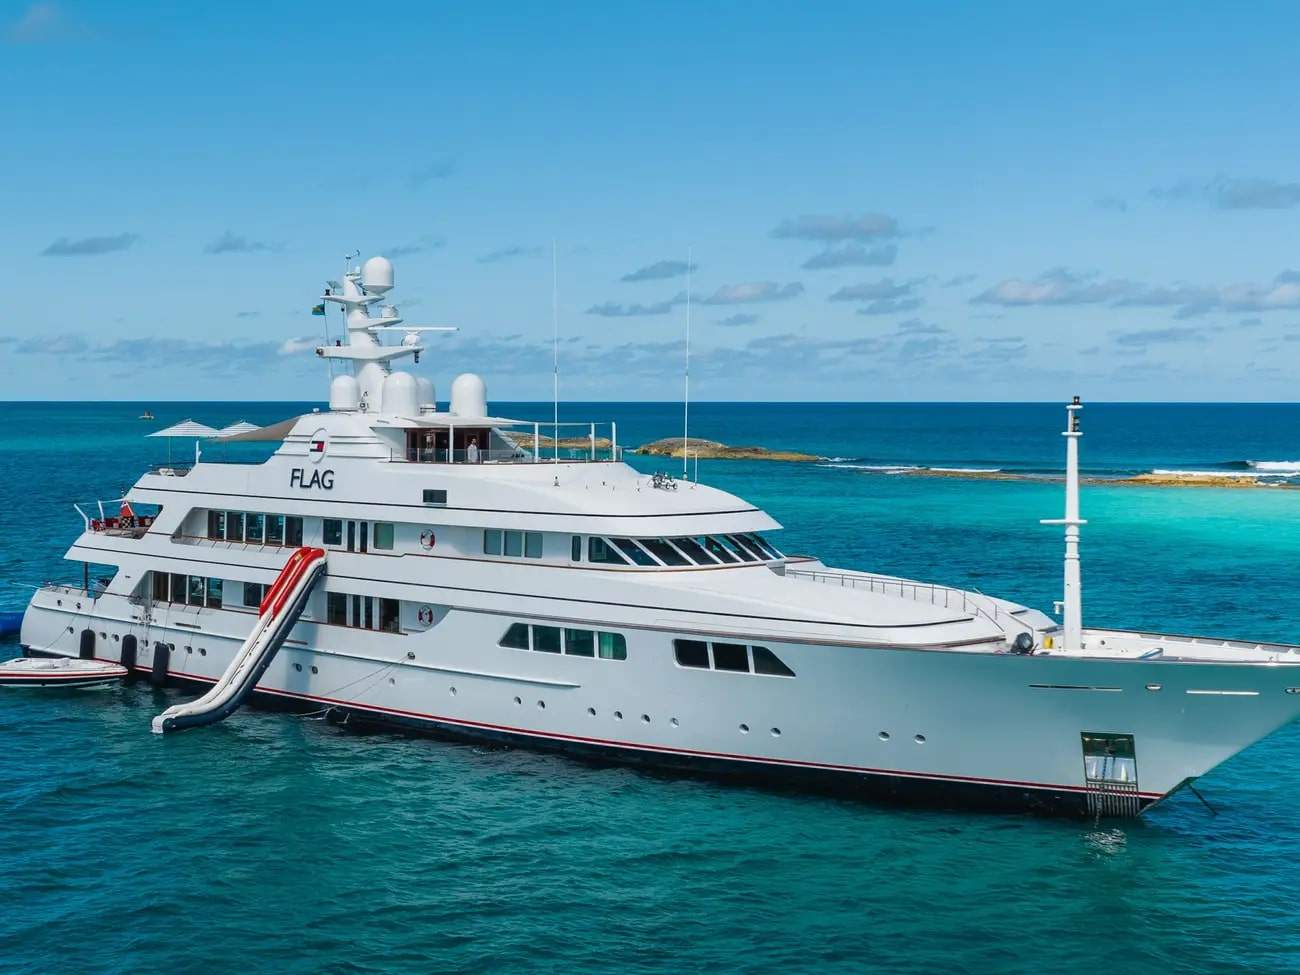 Inside Tommy Hilfiger's fashionable US$46 million superyacht, YouTuber Enes Yilmazer took a tour of the colossal vessel that's up for sale, which boasts a beach club, jet skis, and jacuzzis …